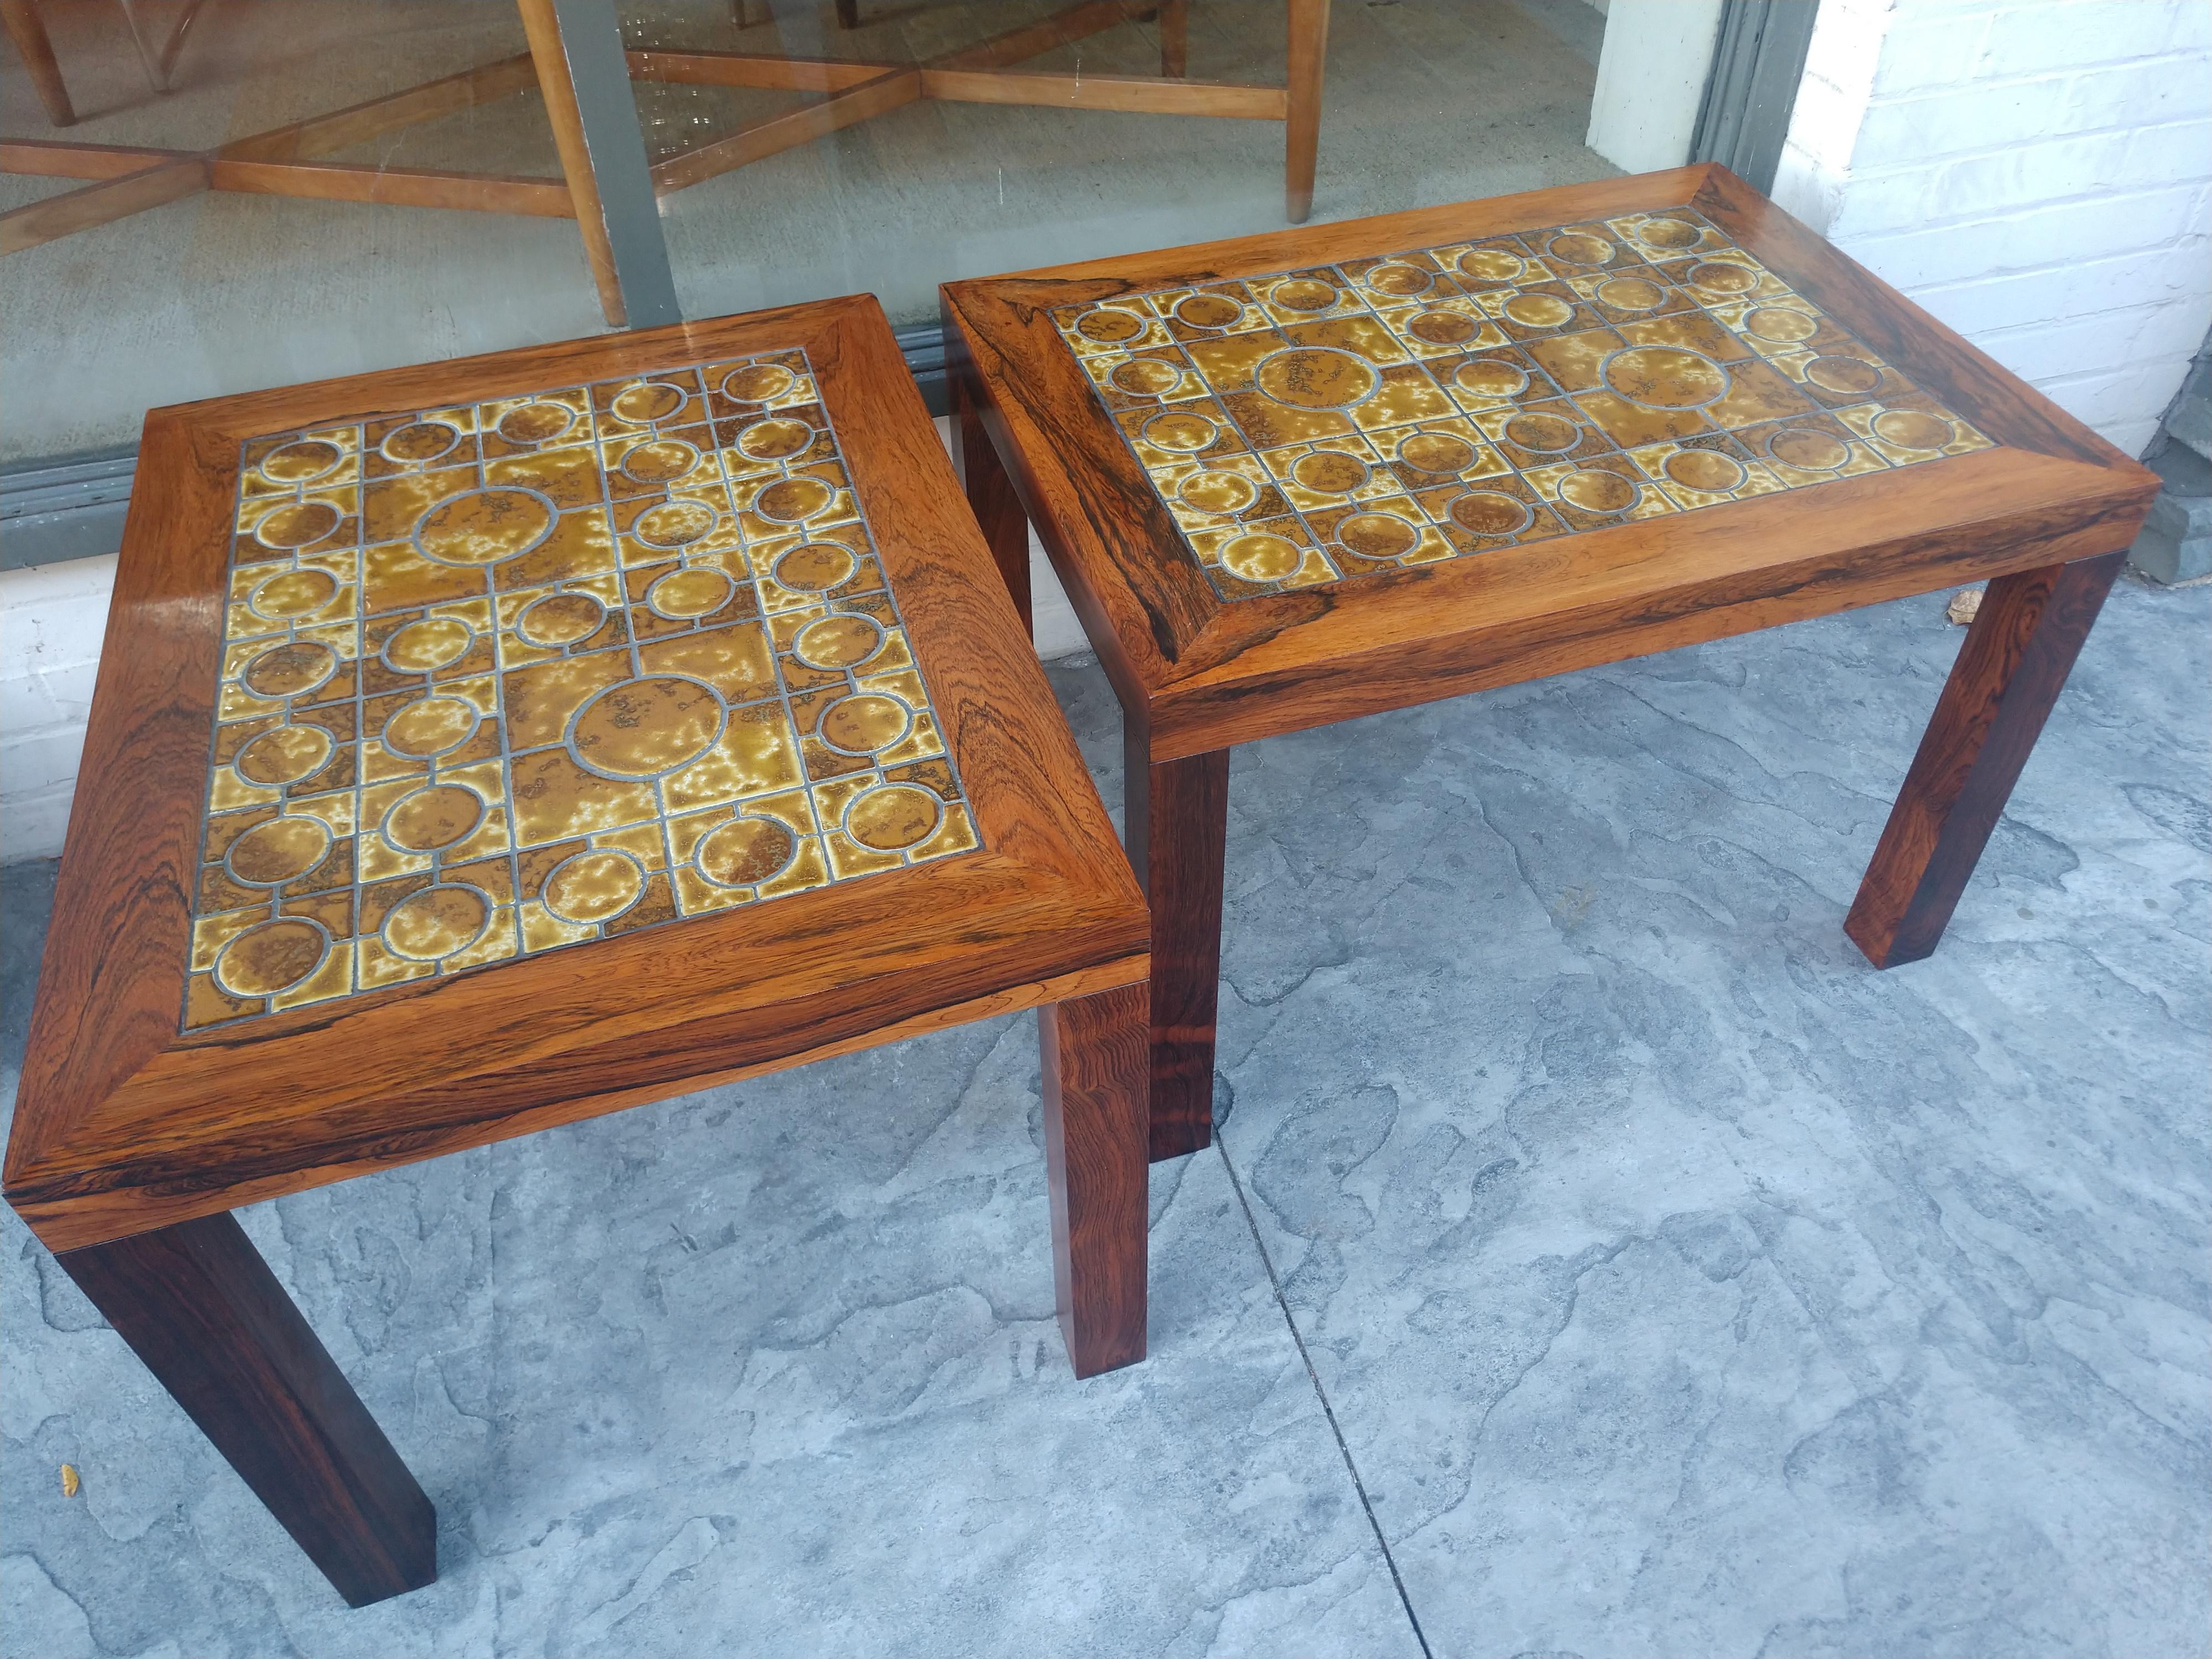 Pair of Mid Century Danish Modern Rosewood End Tables with Inset Tile Tops For Sale 5